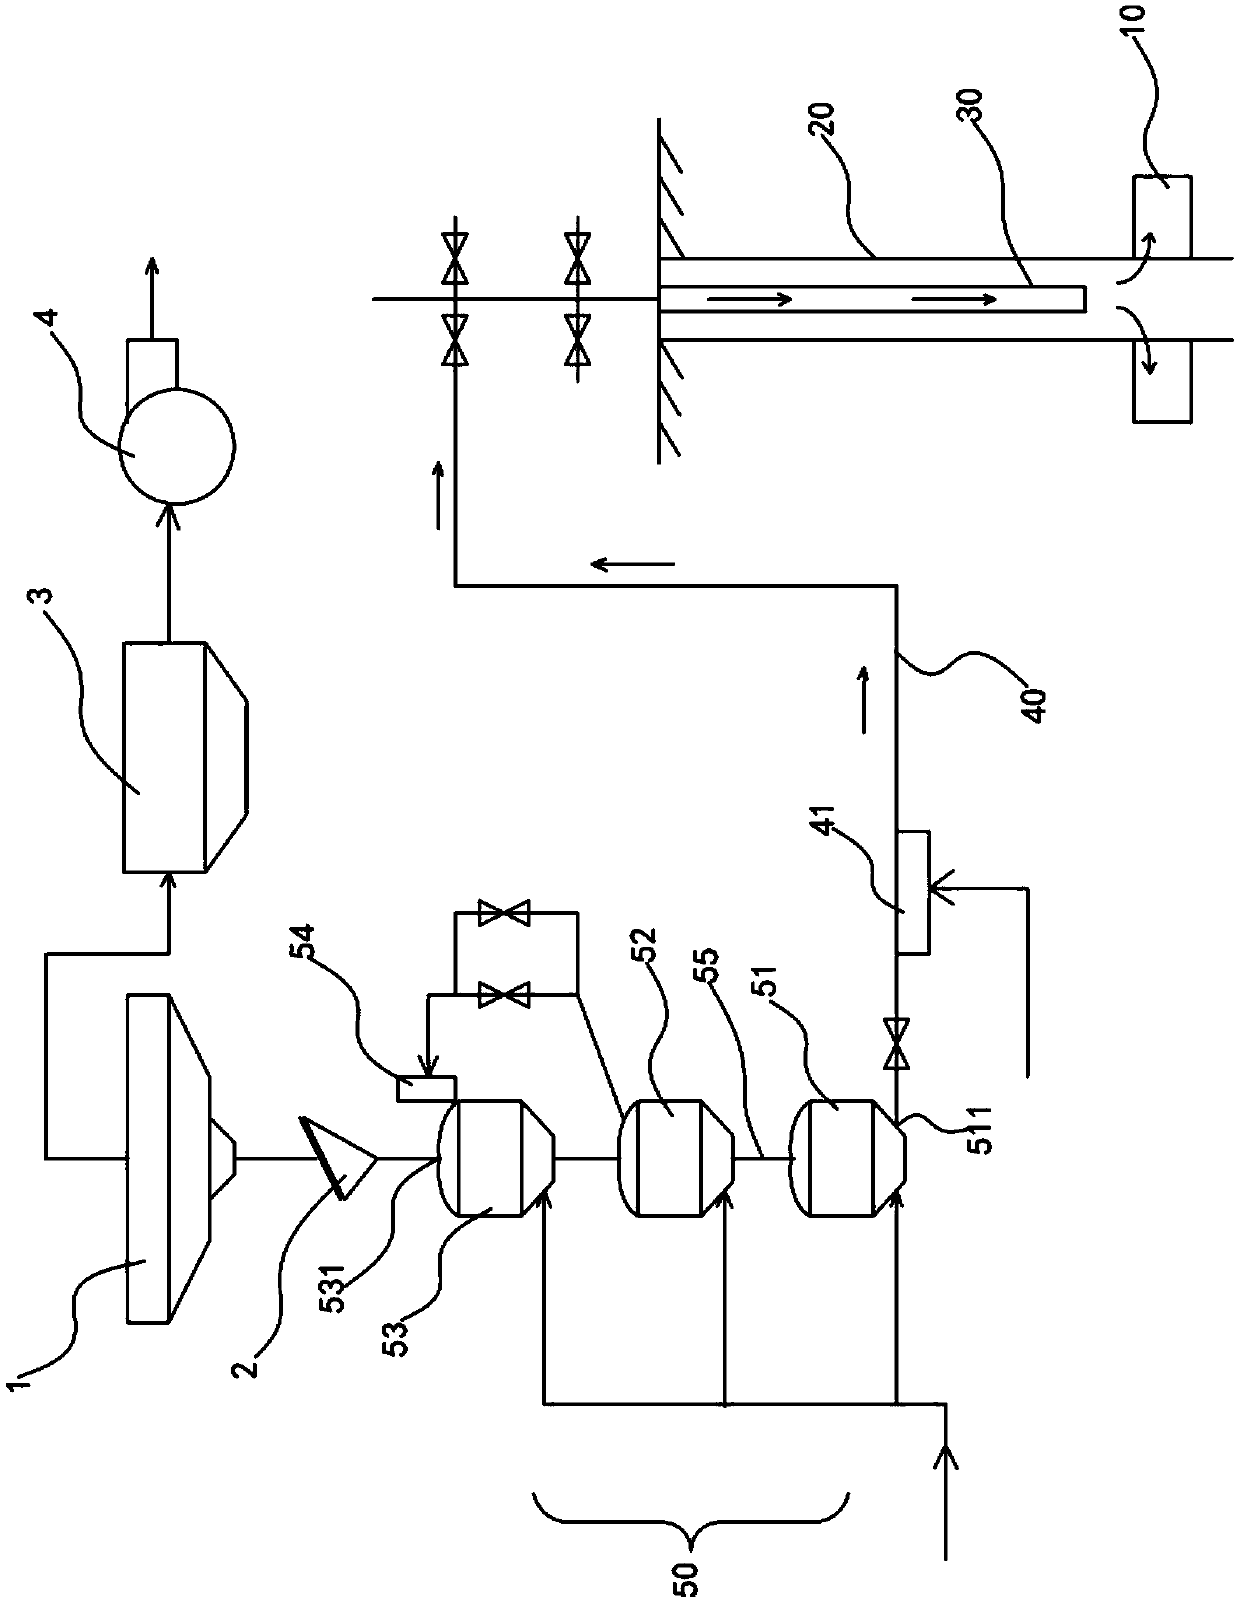 A device for injecting coal powder into an oil layer and an ignition method for burning the oil layer